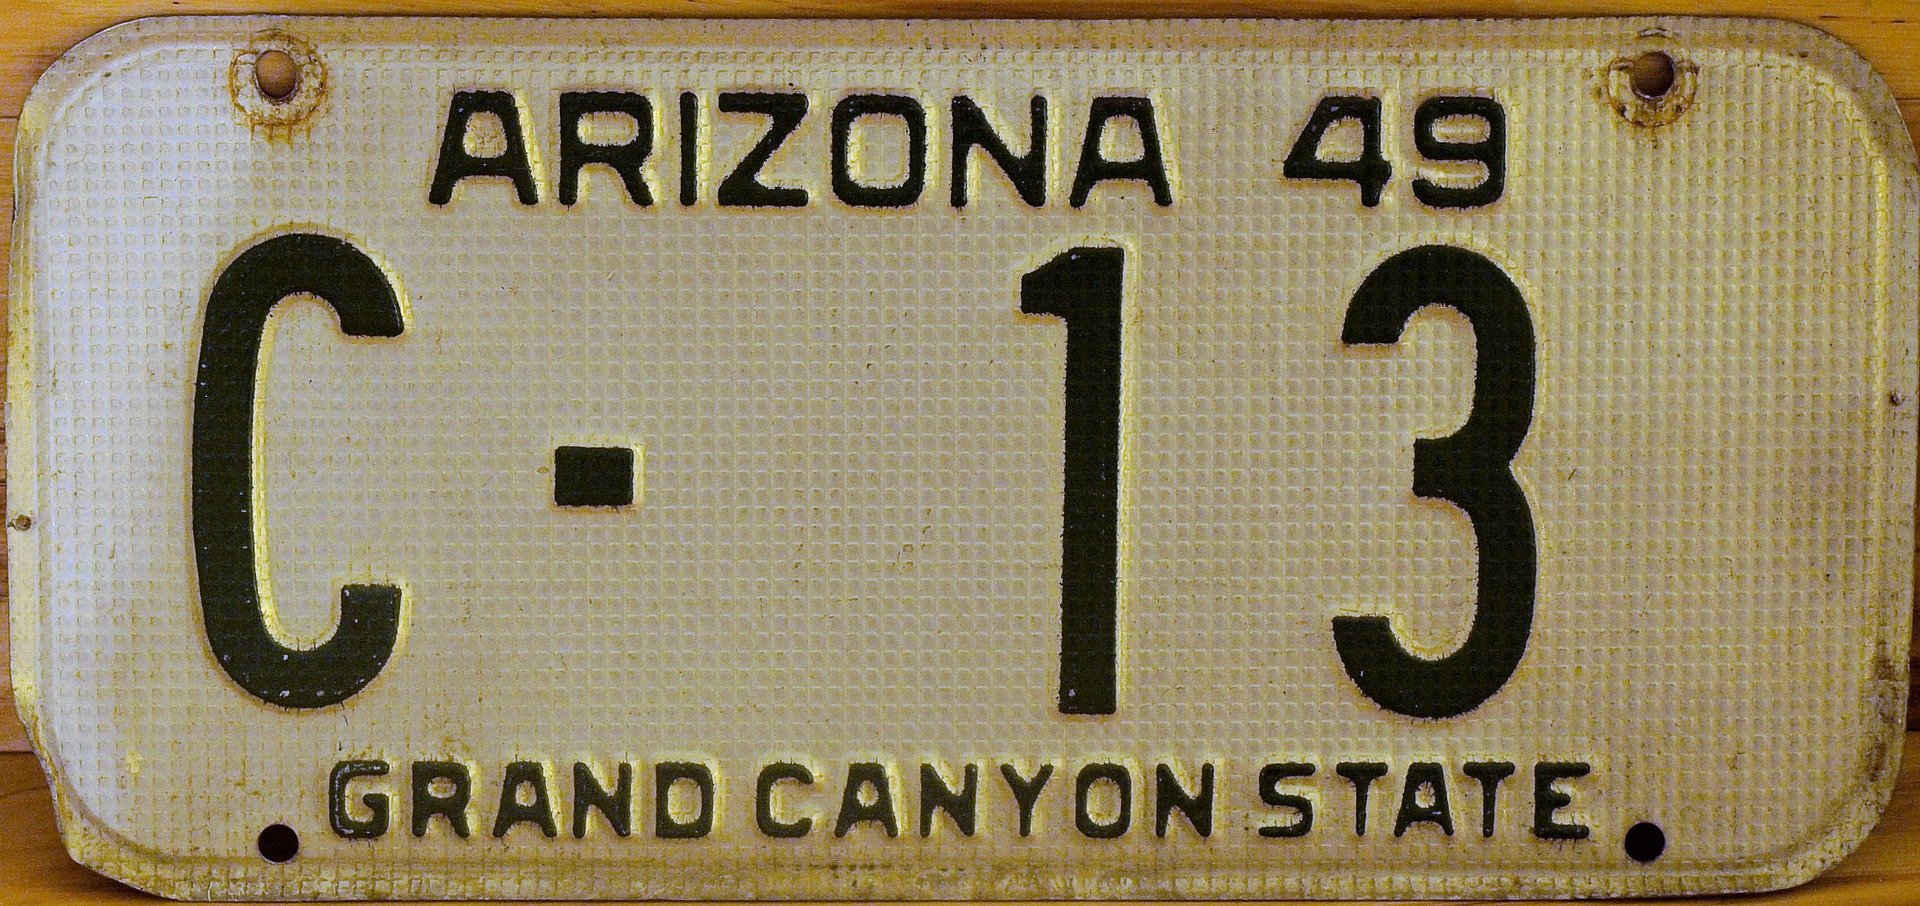 A license plate from Arizona